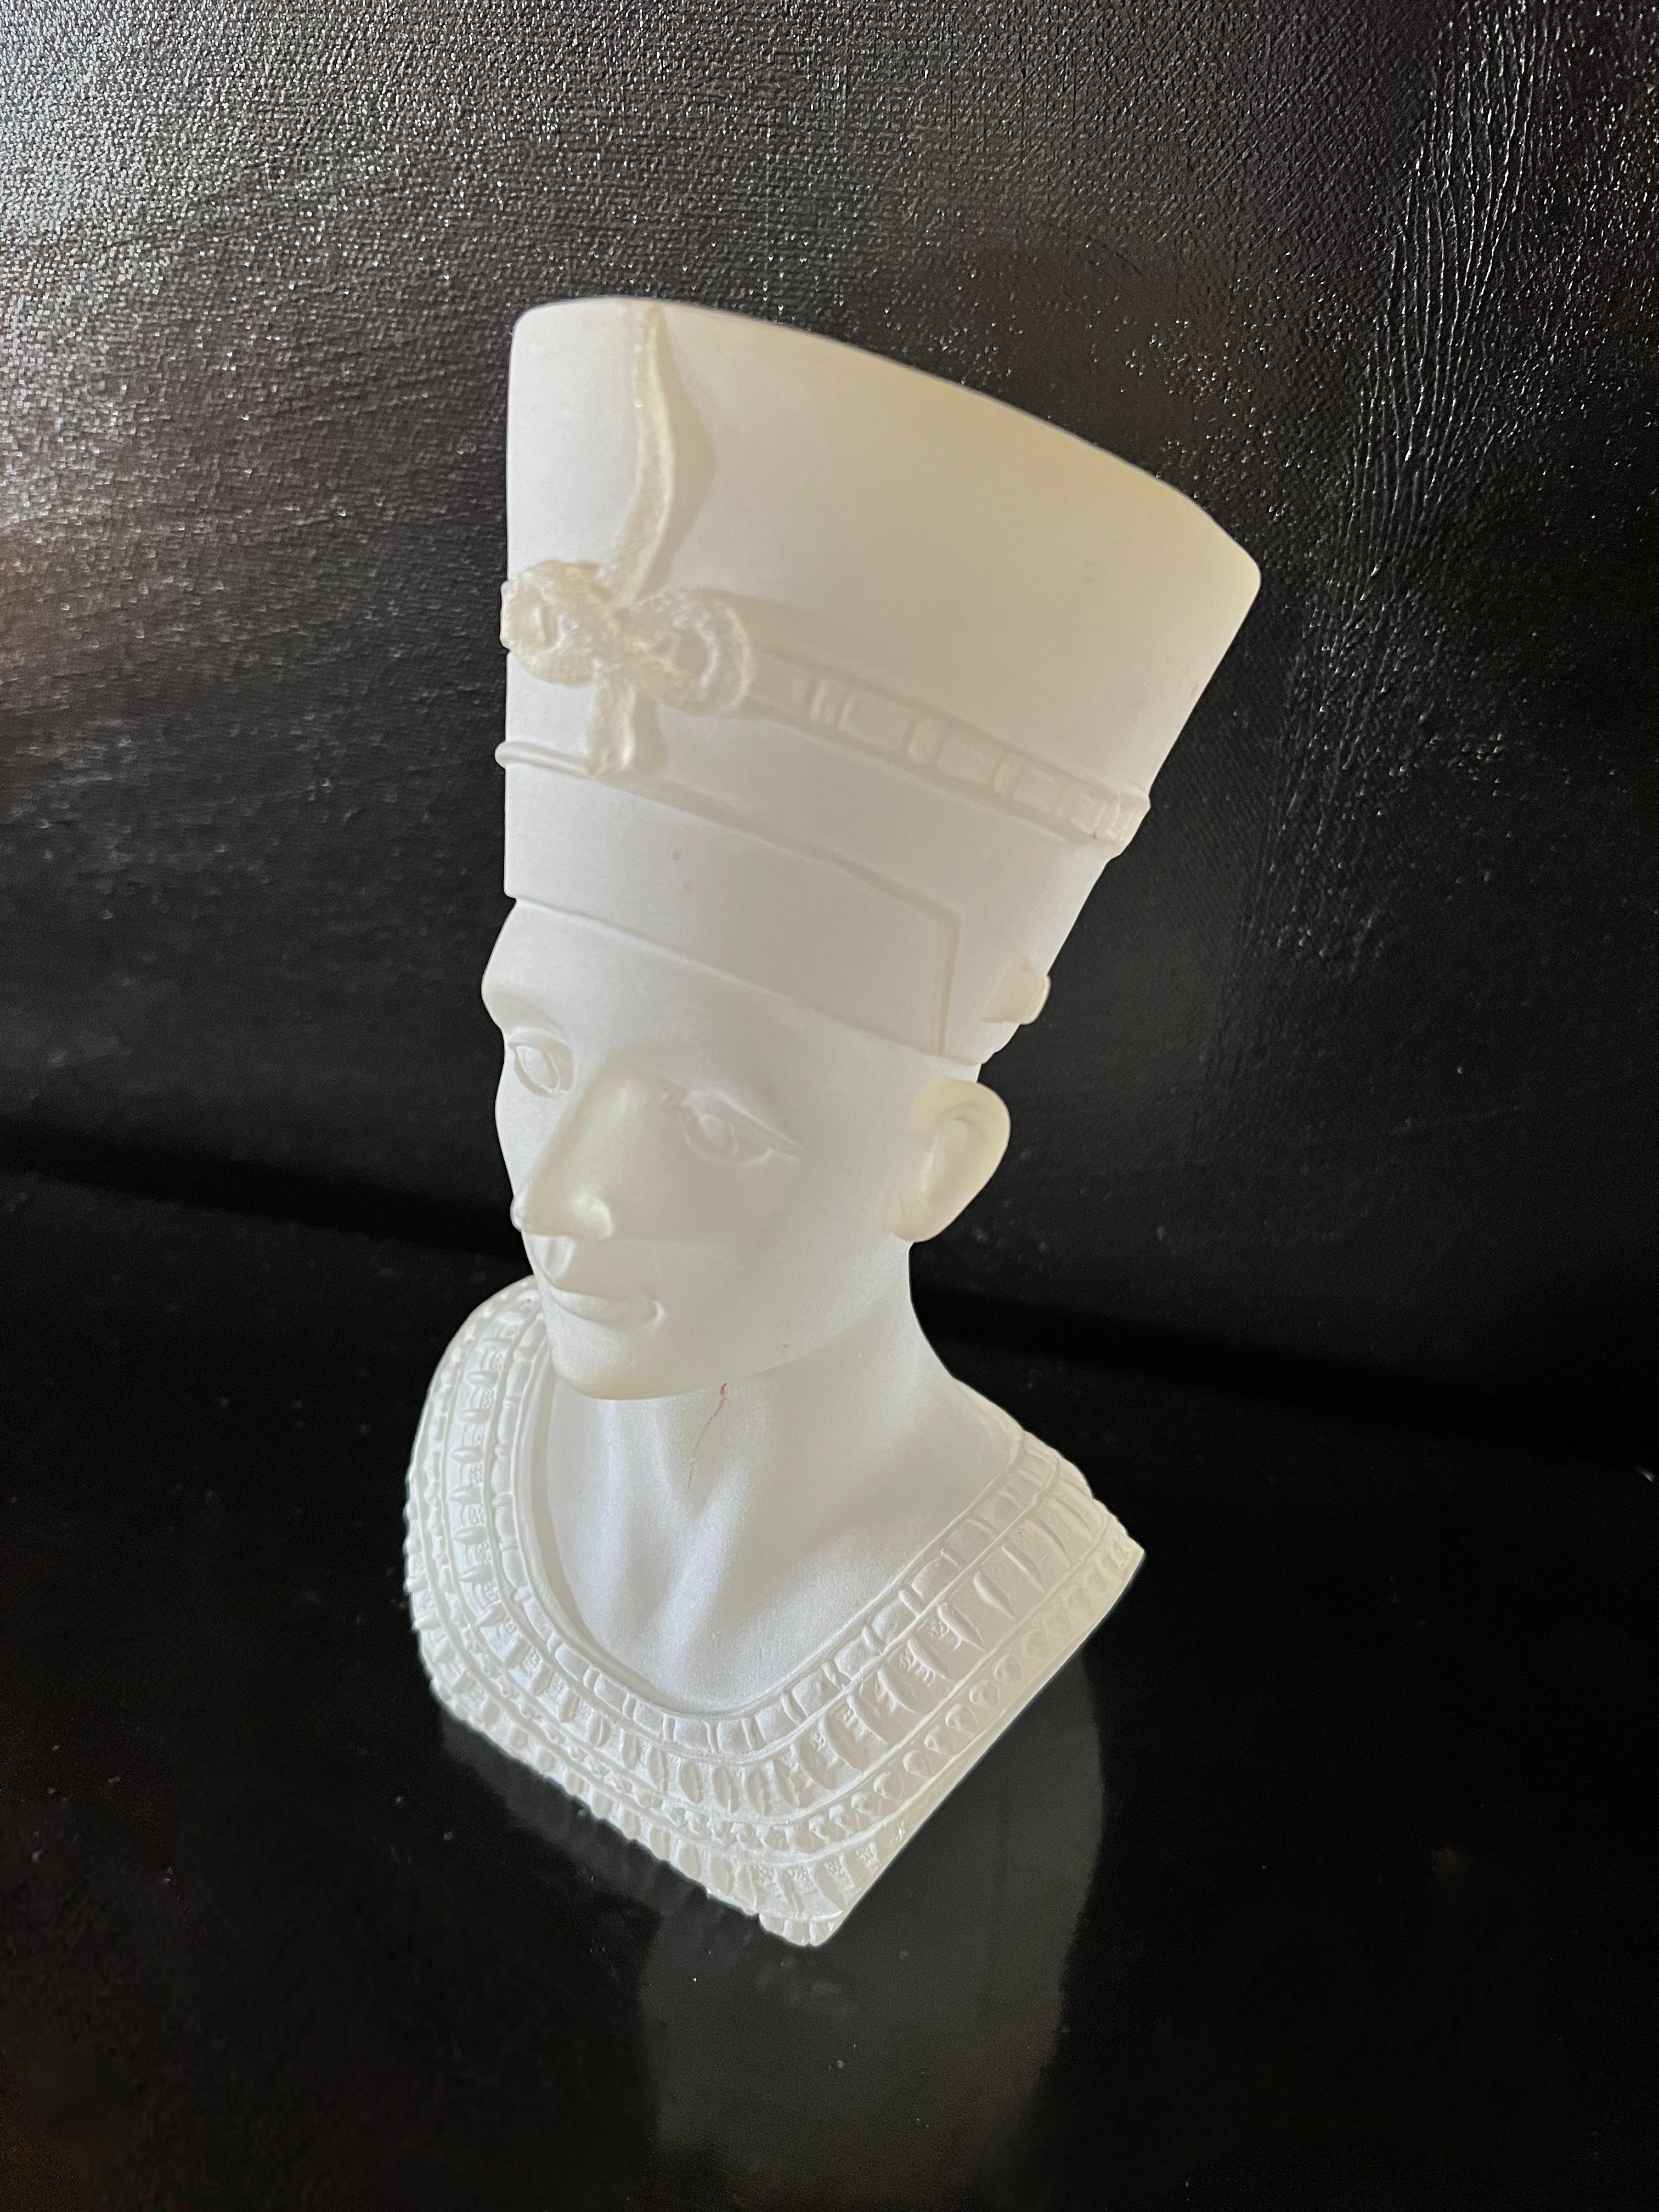 A wonderful acrylic resin head of Nefertiti. A compliment to any shelf, desk or work station. Could be used as a paper weight or bookend as well. The piece is of good size and is well made - the light casting through it is unique depending on it's